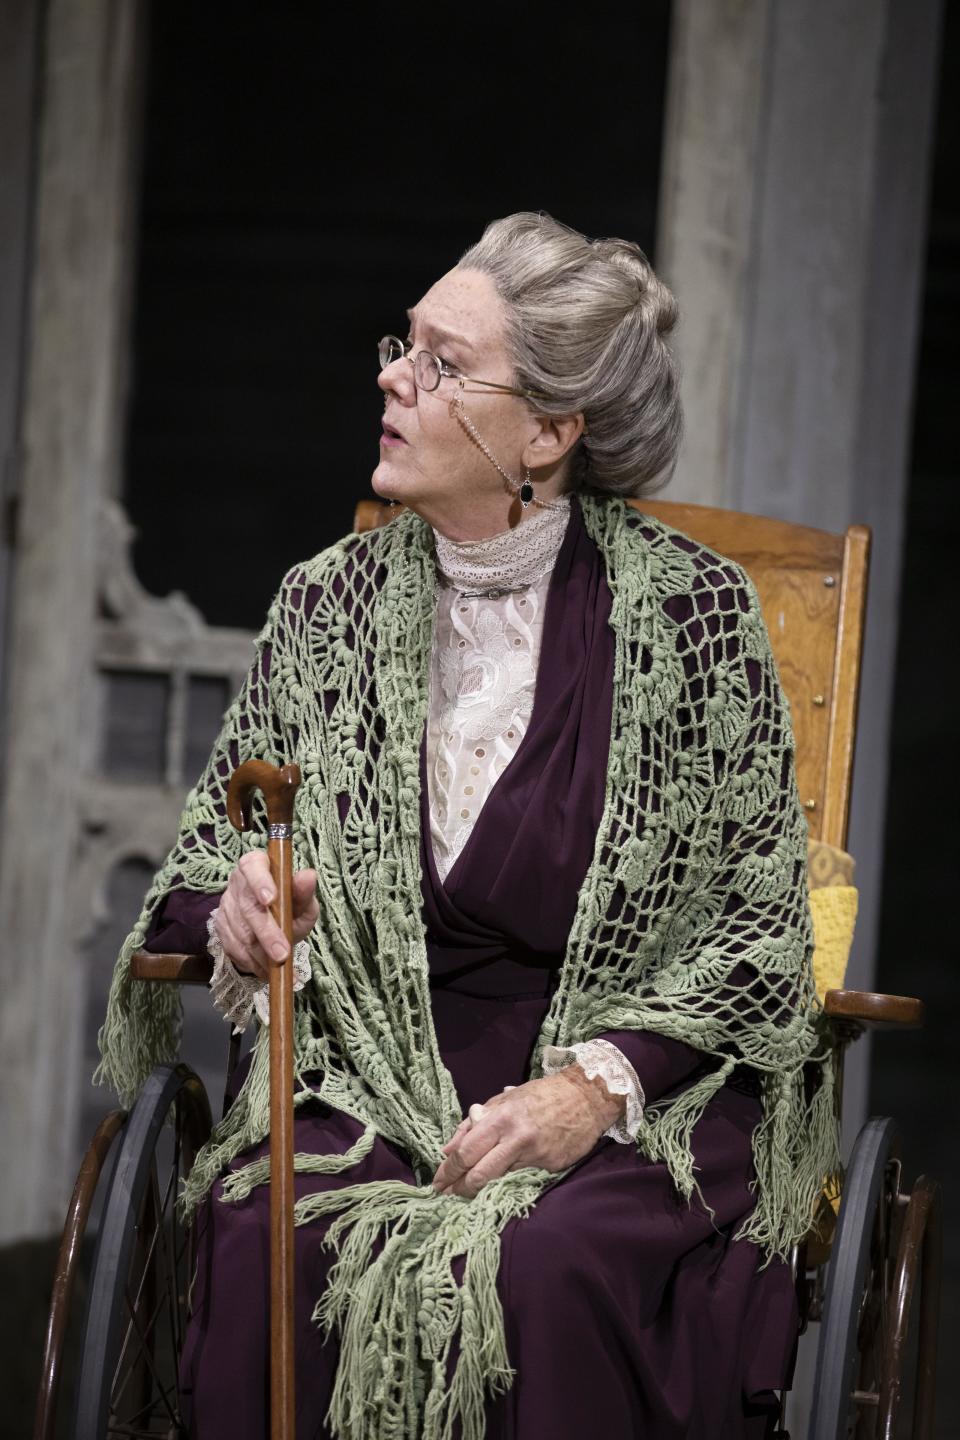 Birmingham-born Mary Badham, who played Scout in the 1962 movie "To Kill a Mockingbird," is on the national tour of Aaron Sorkin's stage adaptation of Harper Lee's novel. The run comes to her birth city Nov. 14-19